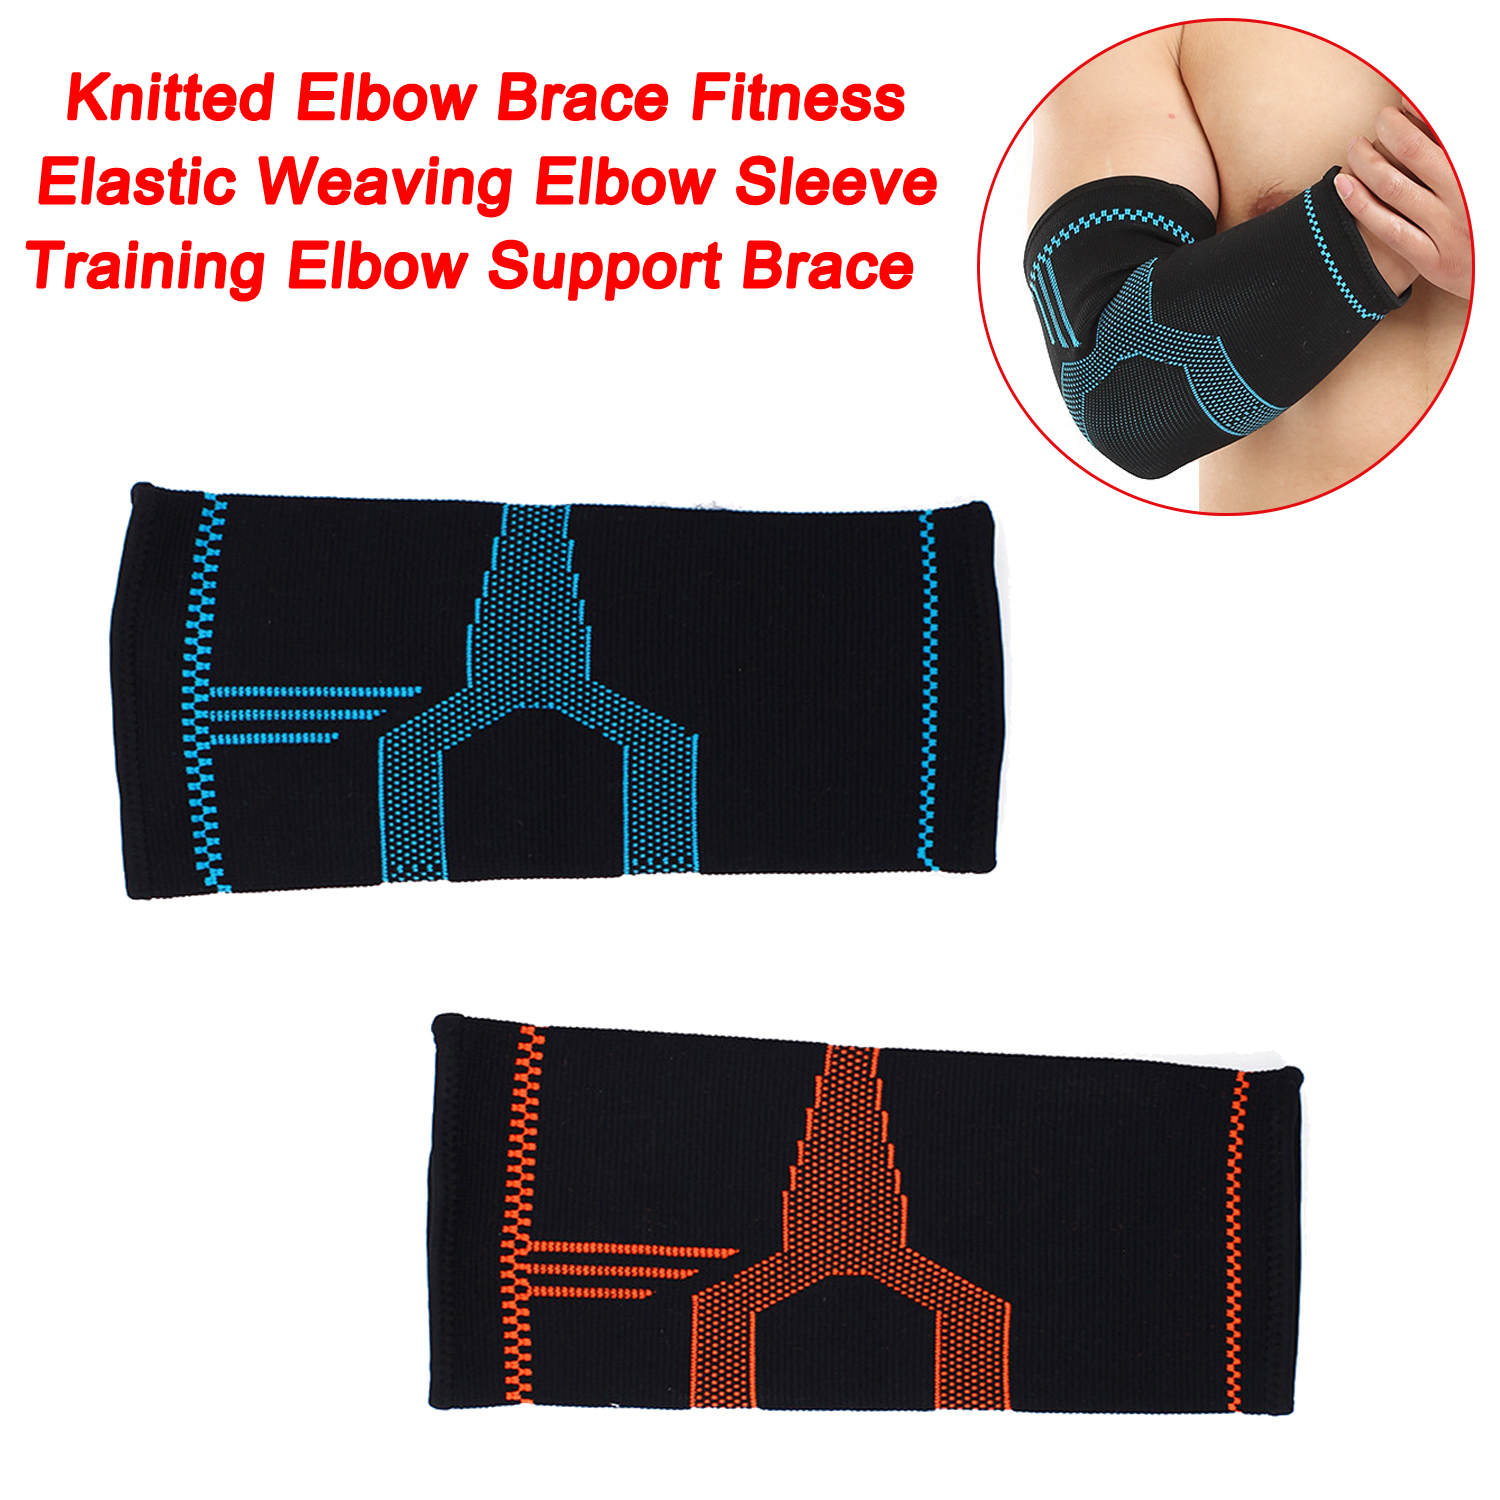 Knitted Elbow Brace Fitness Elastic Weaving Elbow Sleeve Training Elbow Support Brace